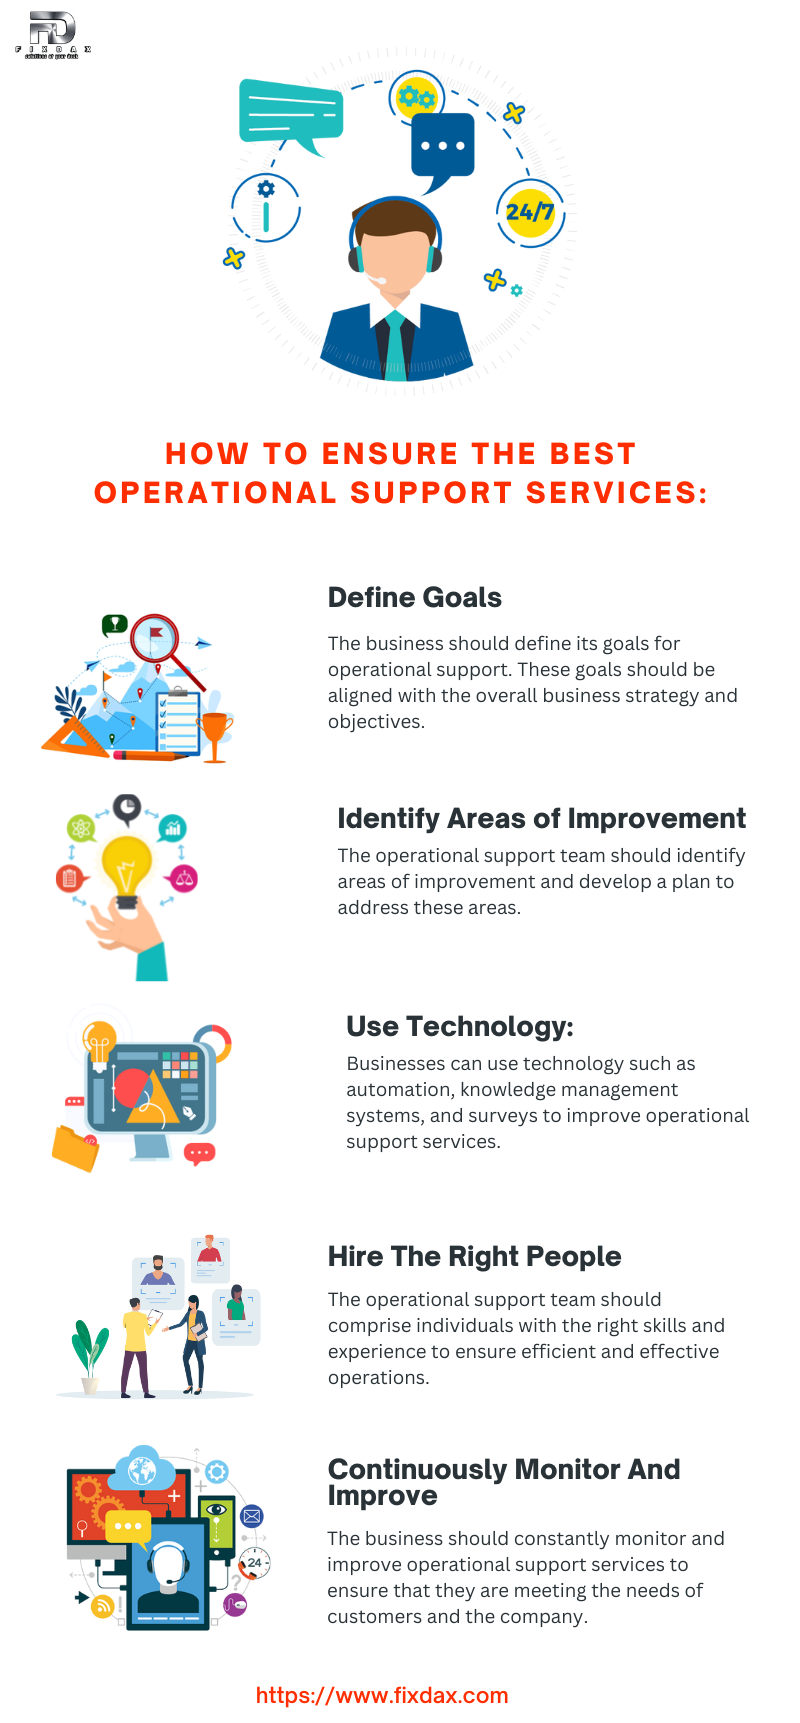 How To Ensure The Best Operational Support Services (1)